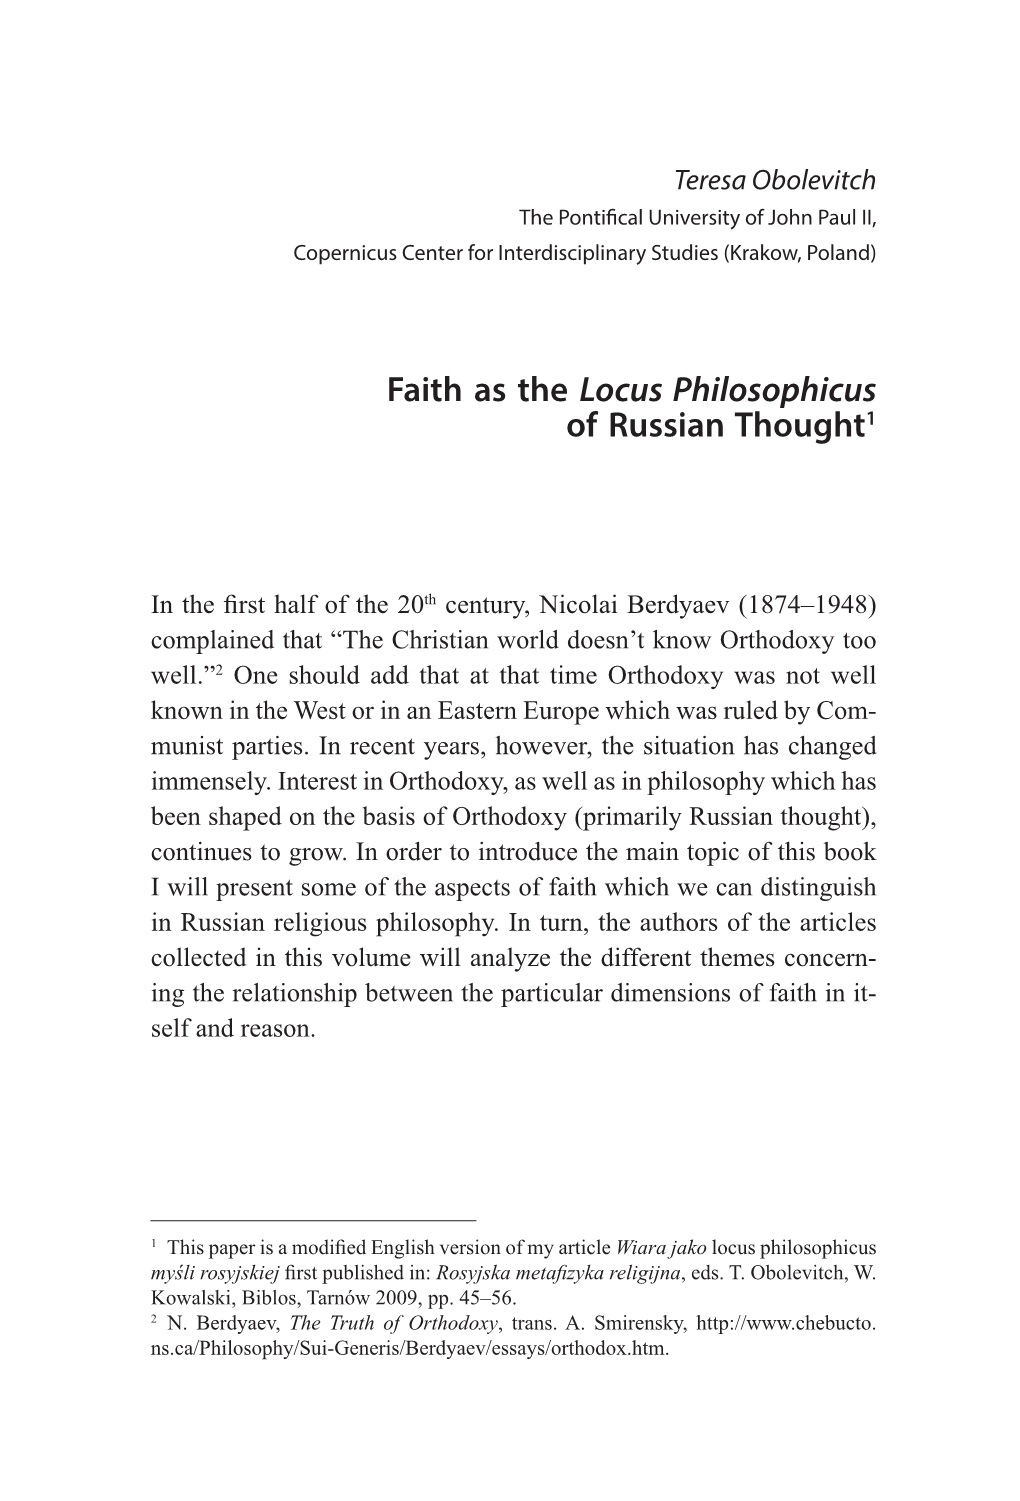 Faith As the Locus Philosophicus of Russian Thought1